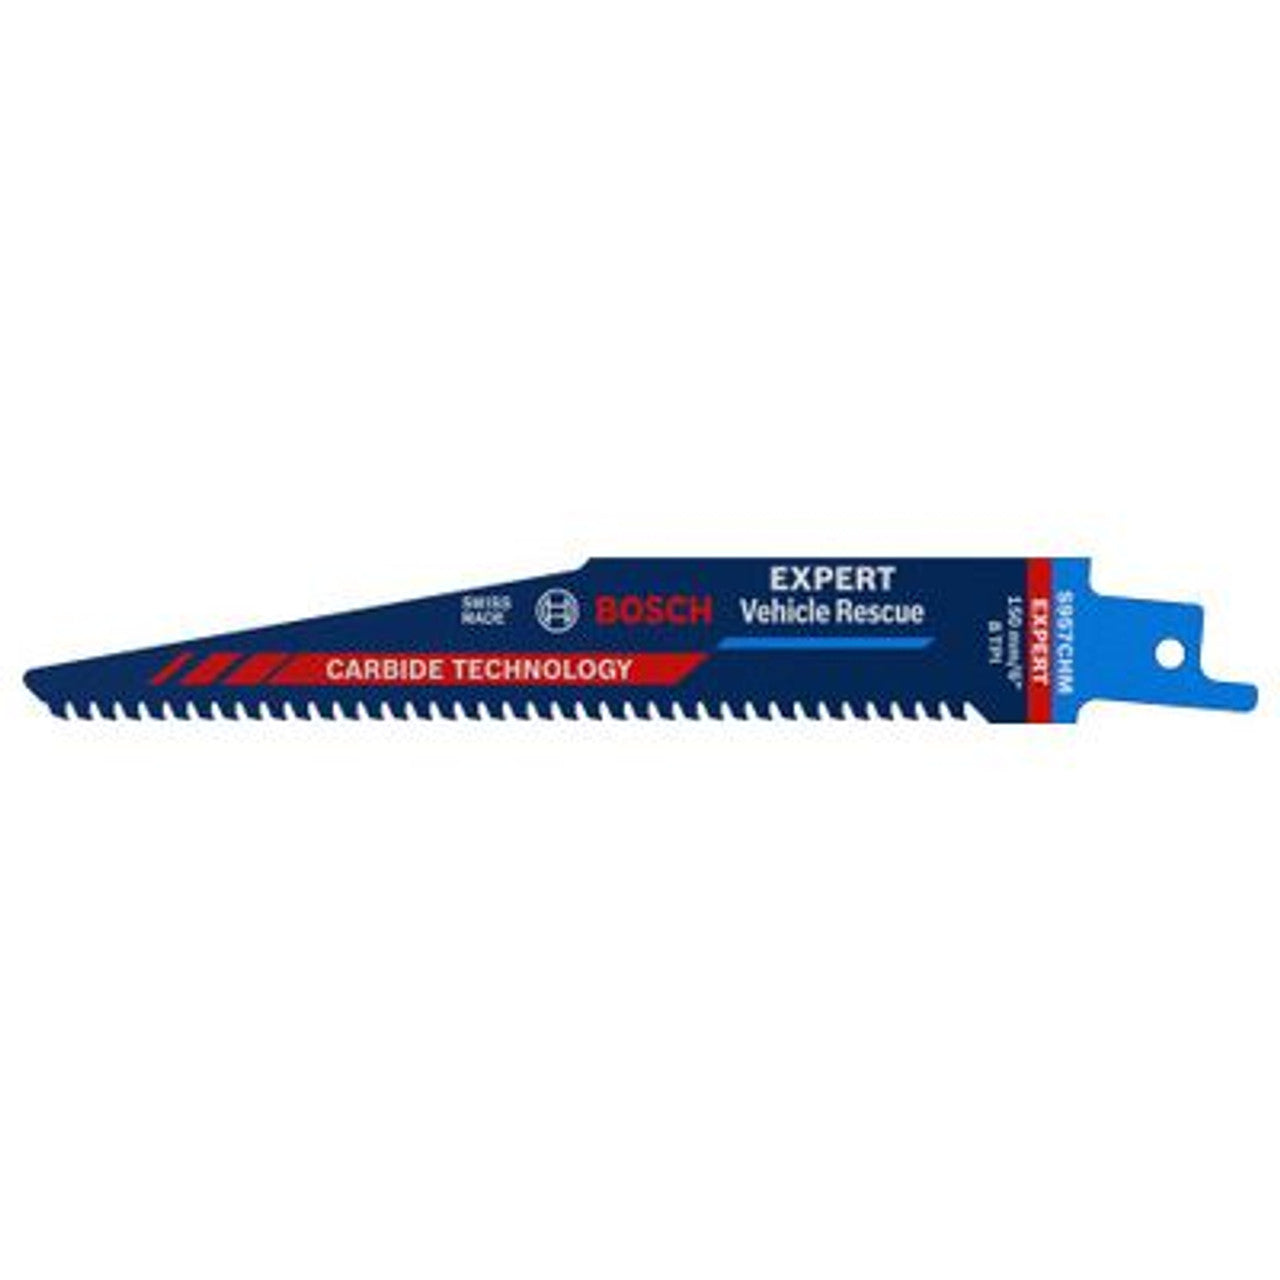 Bosch Sabre Saw Blades S 957 CHM Endurance for Vehicle Rescue 2608900378 Power Tool Services